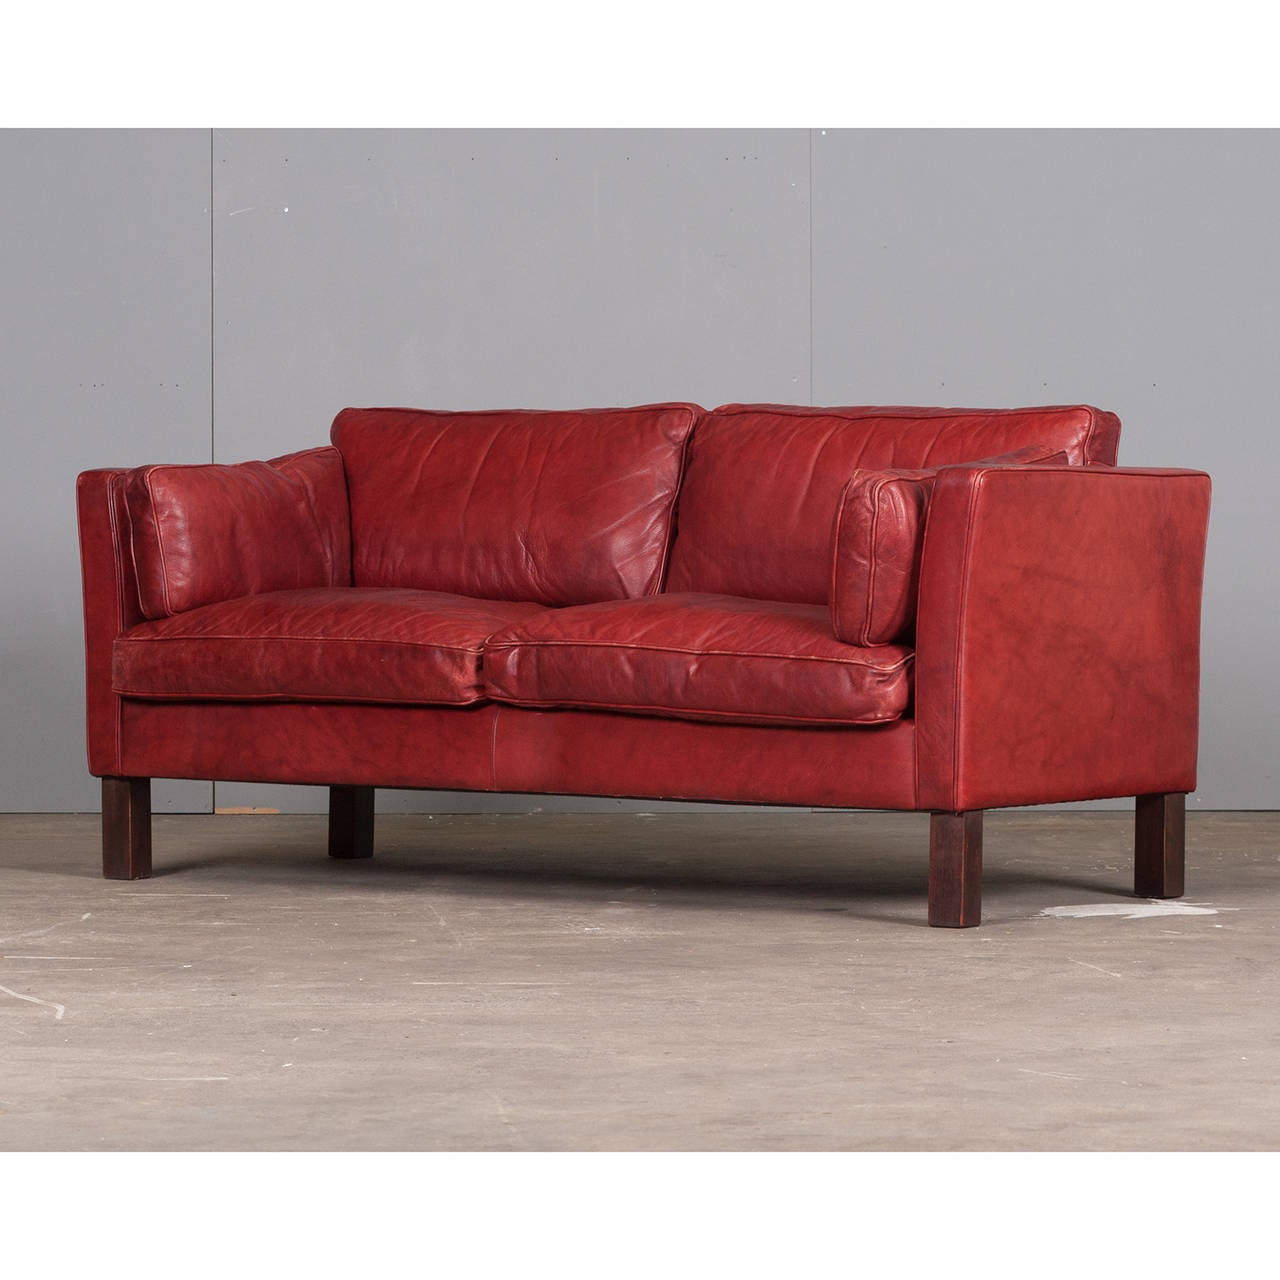 What a beauty! This stunning piece features the classic style of a Mid-Century Modern Danish sofa with an exceptional colour by Arne Norell. A striking cherry-red coloured leather, this sofa is both stylish and comfortable and in superb condition.